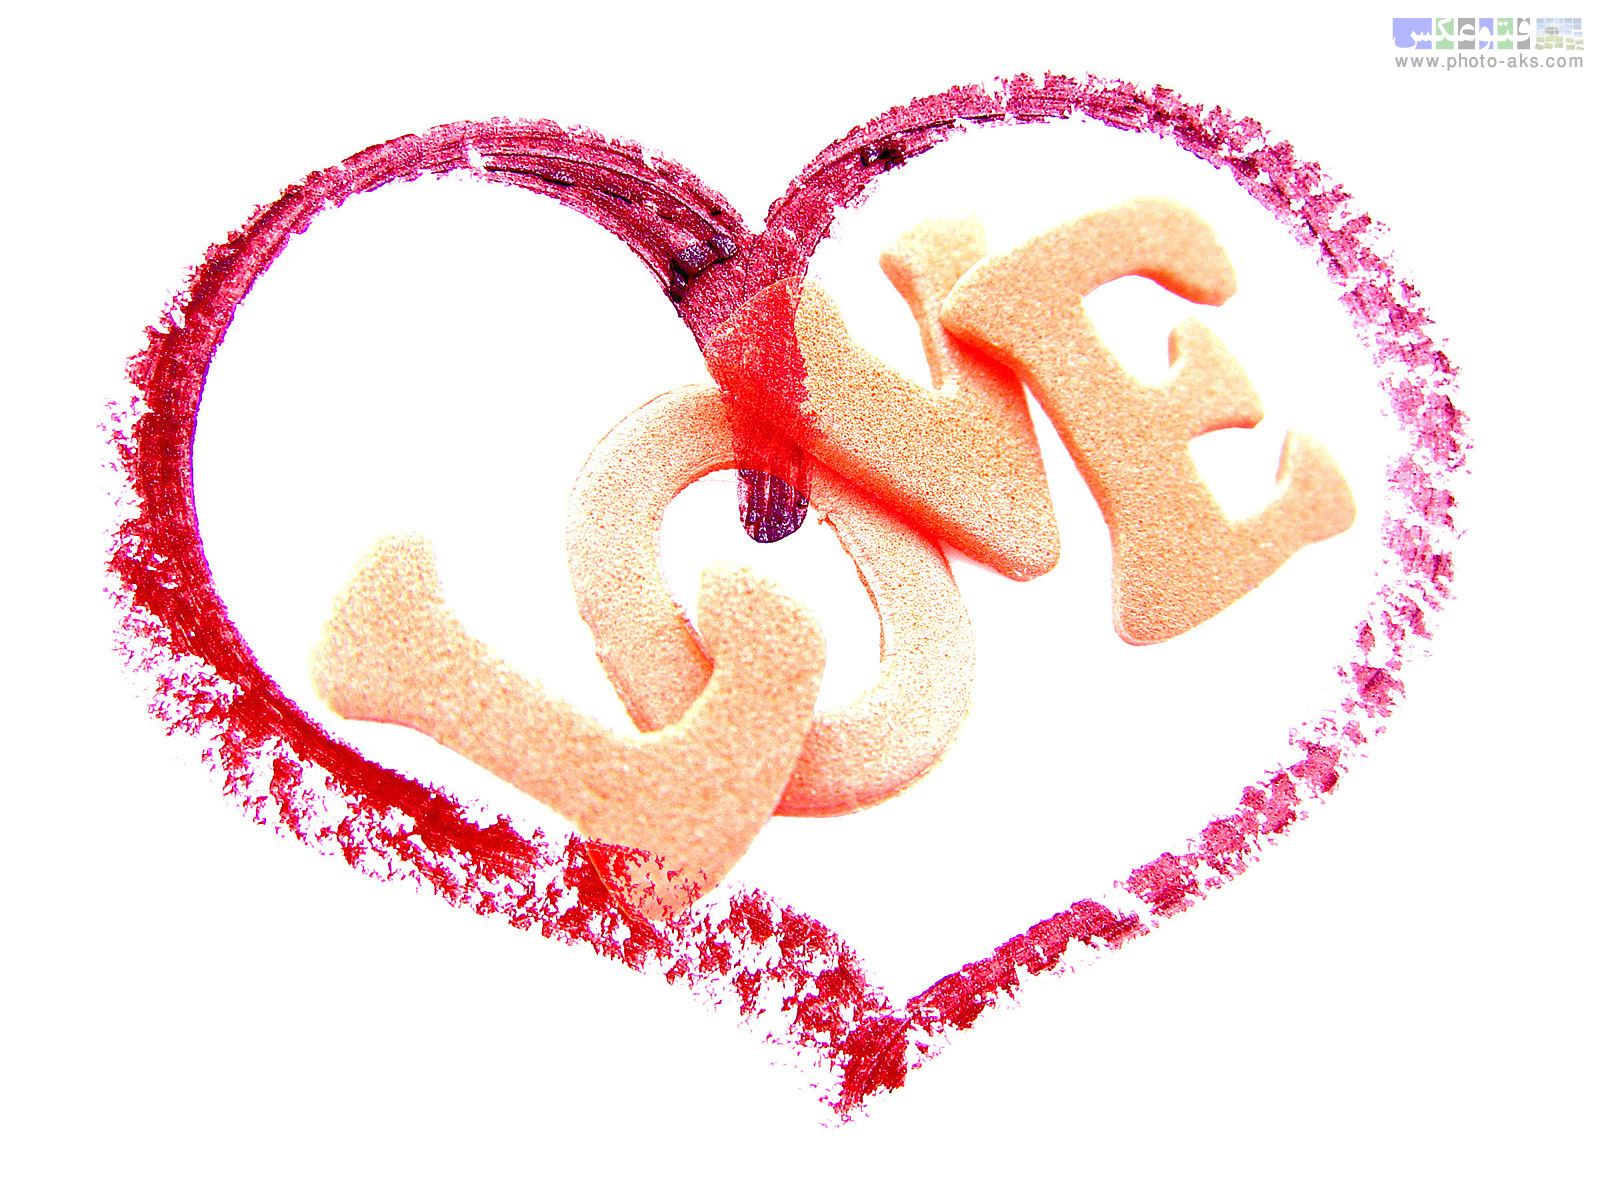 http://pic.photo-aks.com/photo/images/love/large/pink-heart-love.jpg